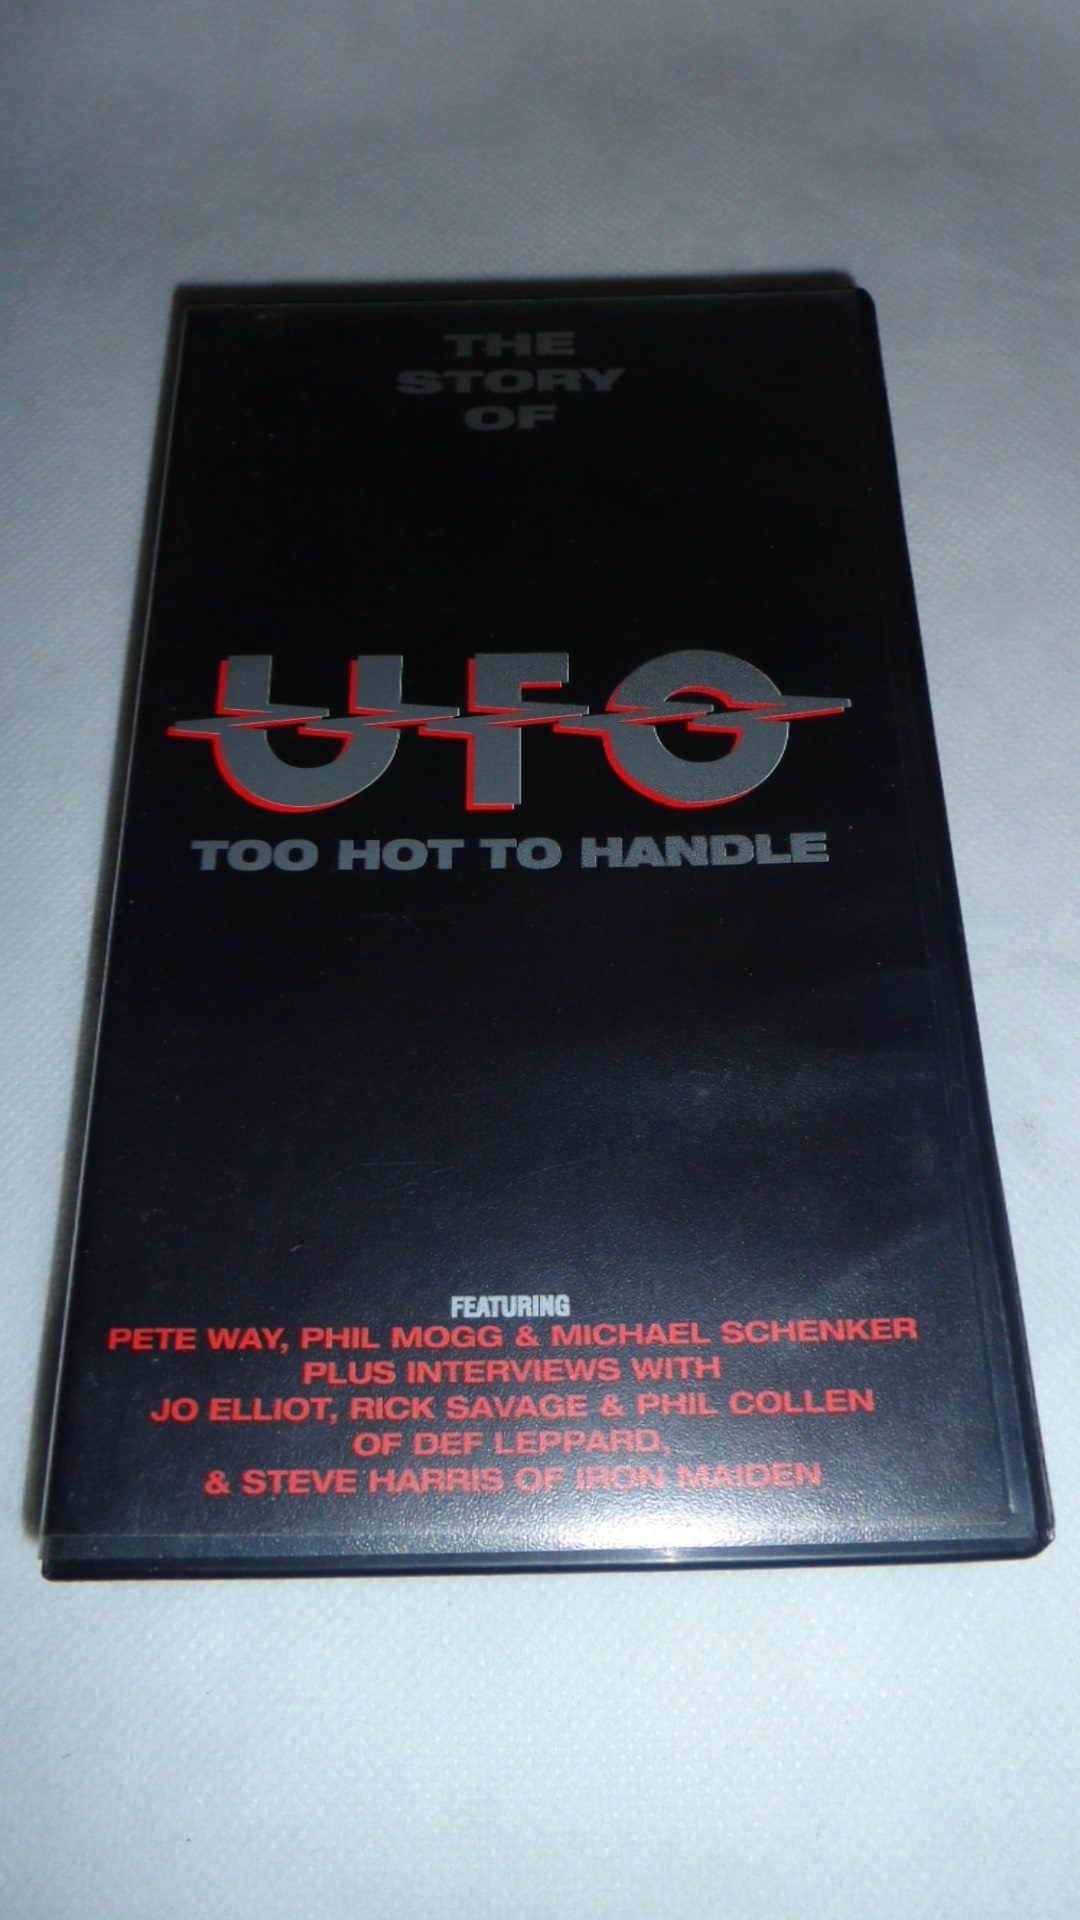 FITA VHS - UFO - Too Hot To Handle The History Of (USA)